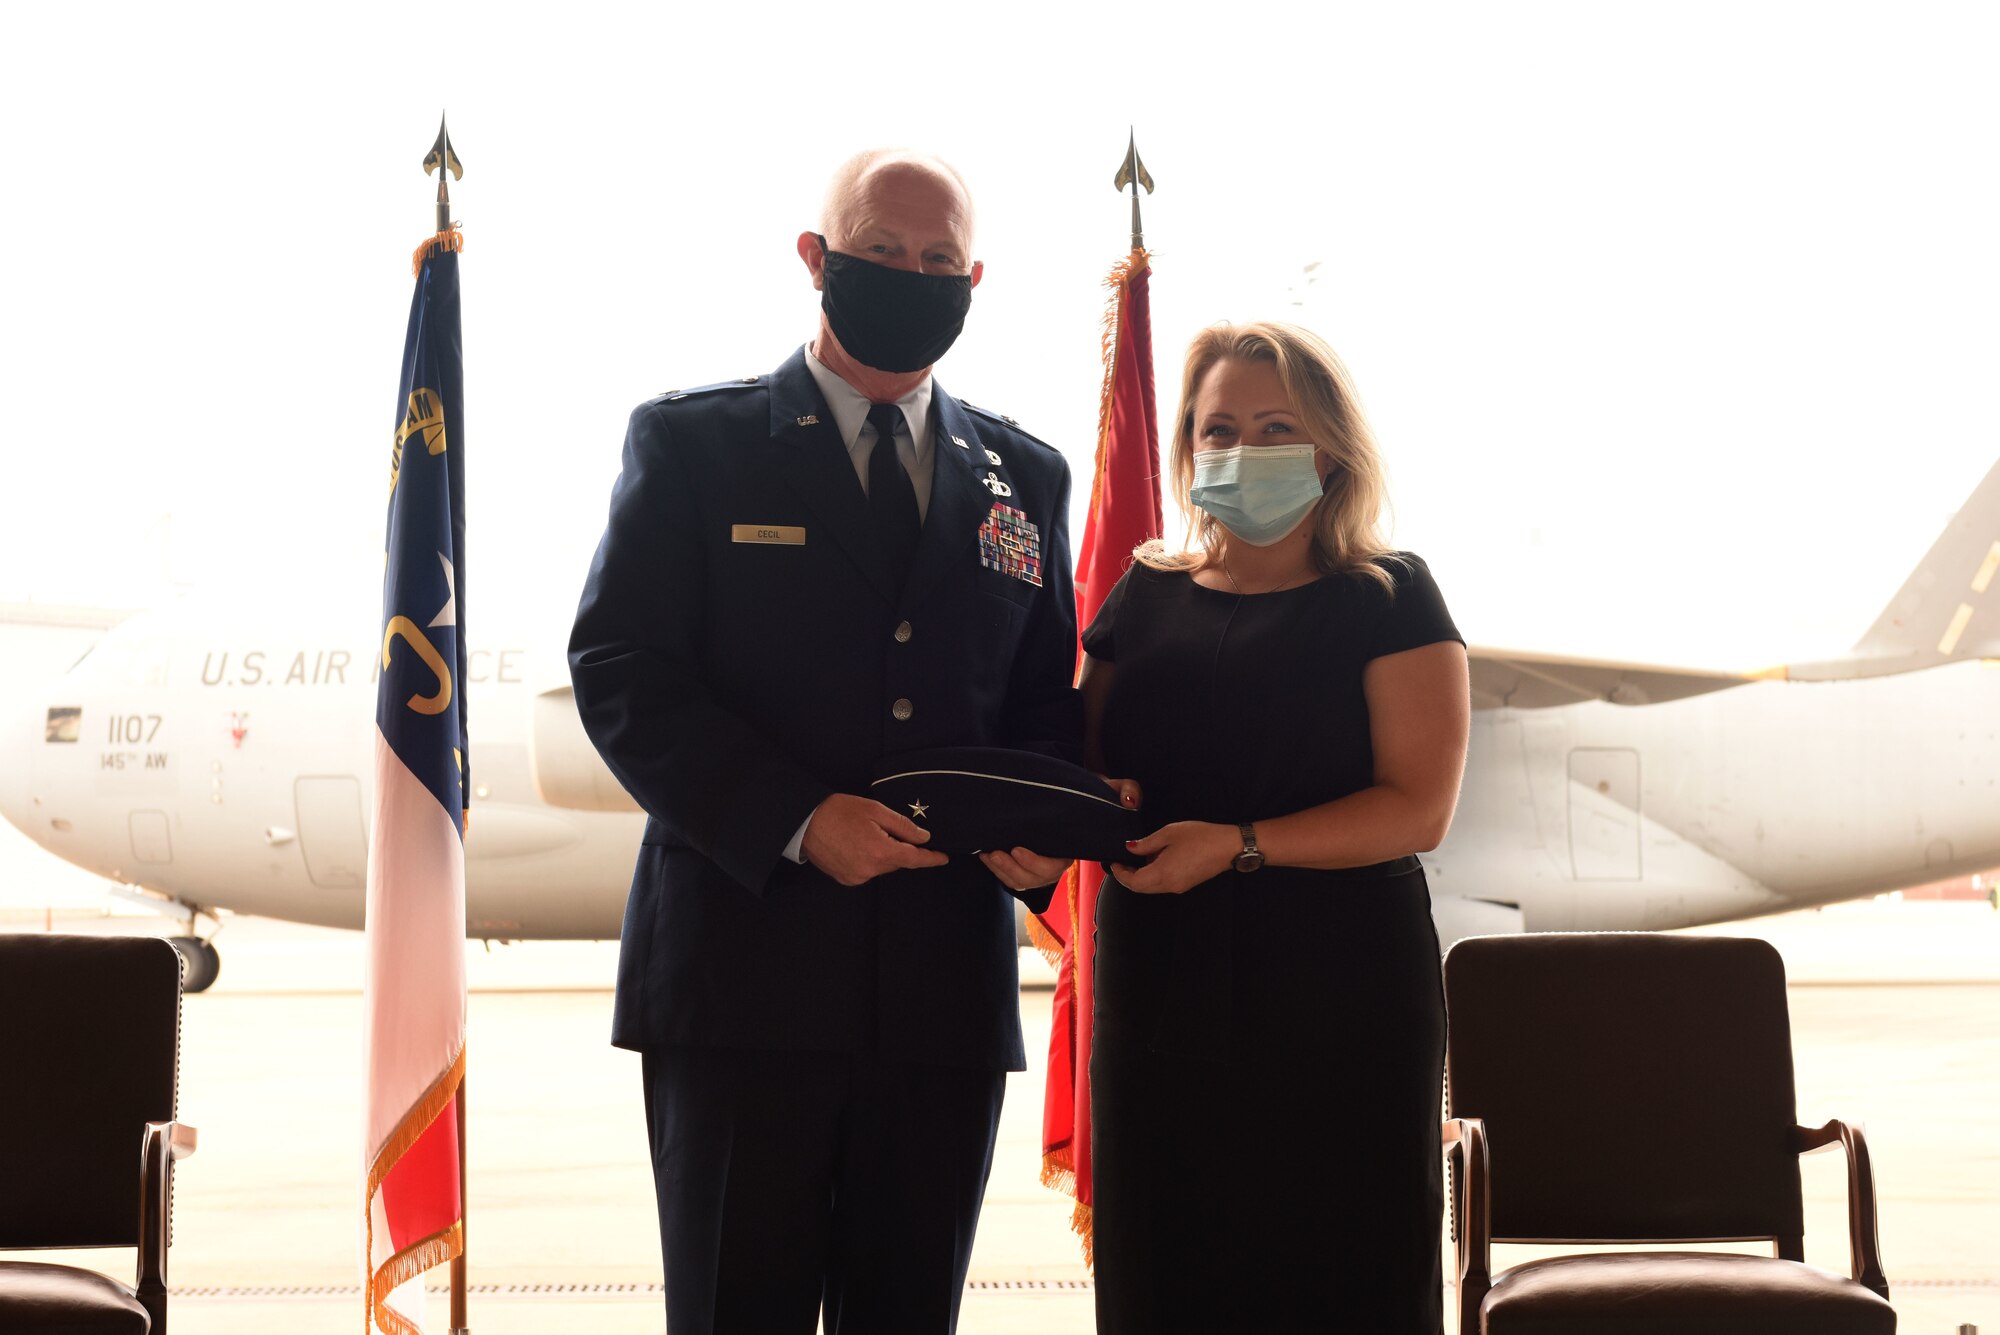 U.S. Air Force Brig. Gen. Allan R. Cecil (left), North Carolina National Guard (NCNG) Chief of Staff, is presented his new cover with rank emblem by Amanda Fox during Brig. Gen. Cecil’s promotion ceremony at the North Carolina Air National Guard Base, Charlotte Douglas International Airport, July 18, 2020. Family, friends, and guard members gather to watch Col. Cecil pin on the rank of Brigadier General.